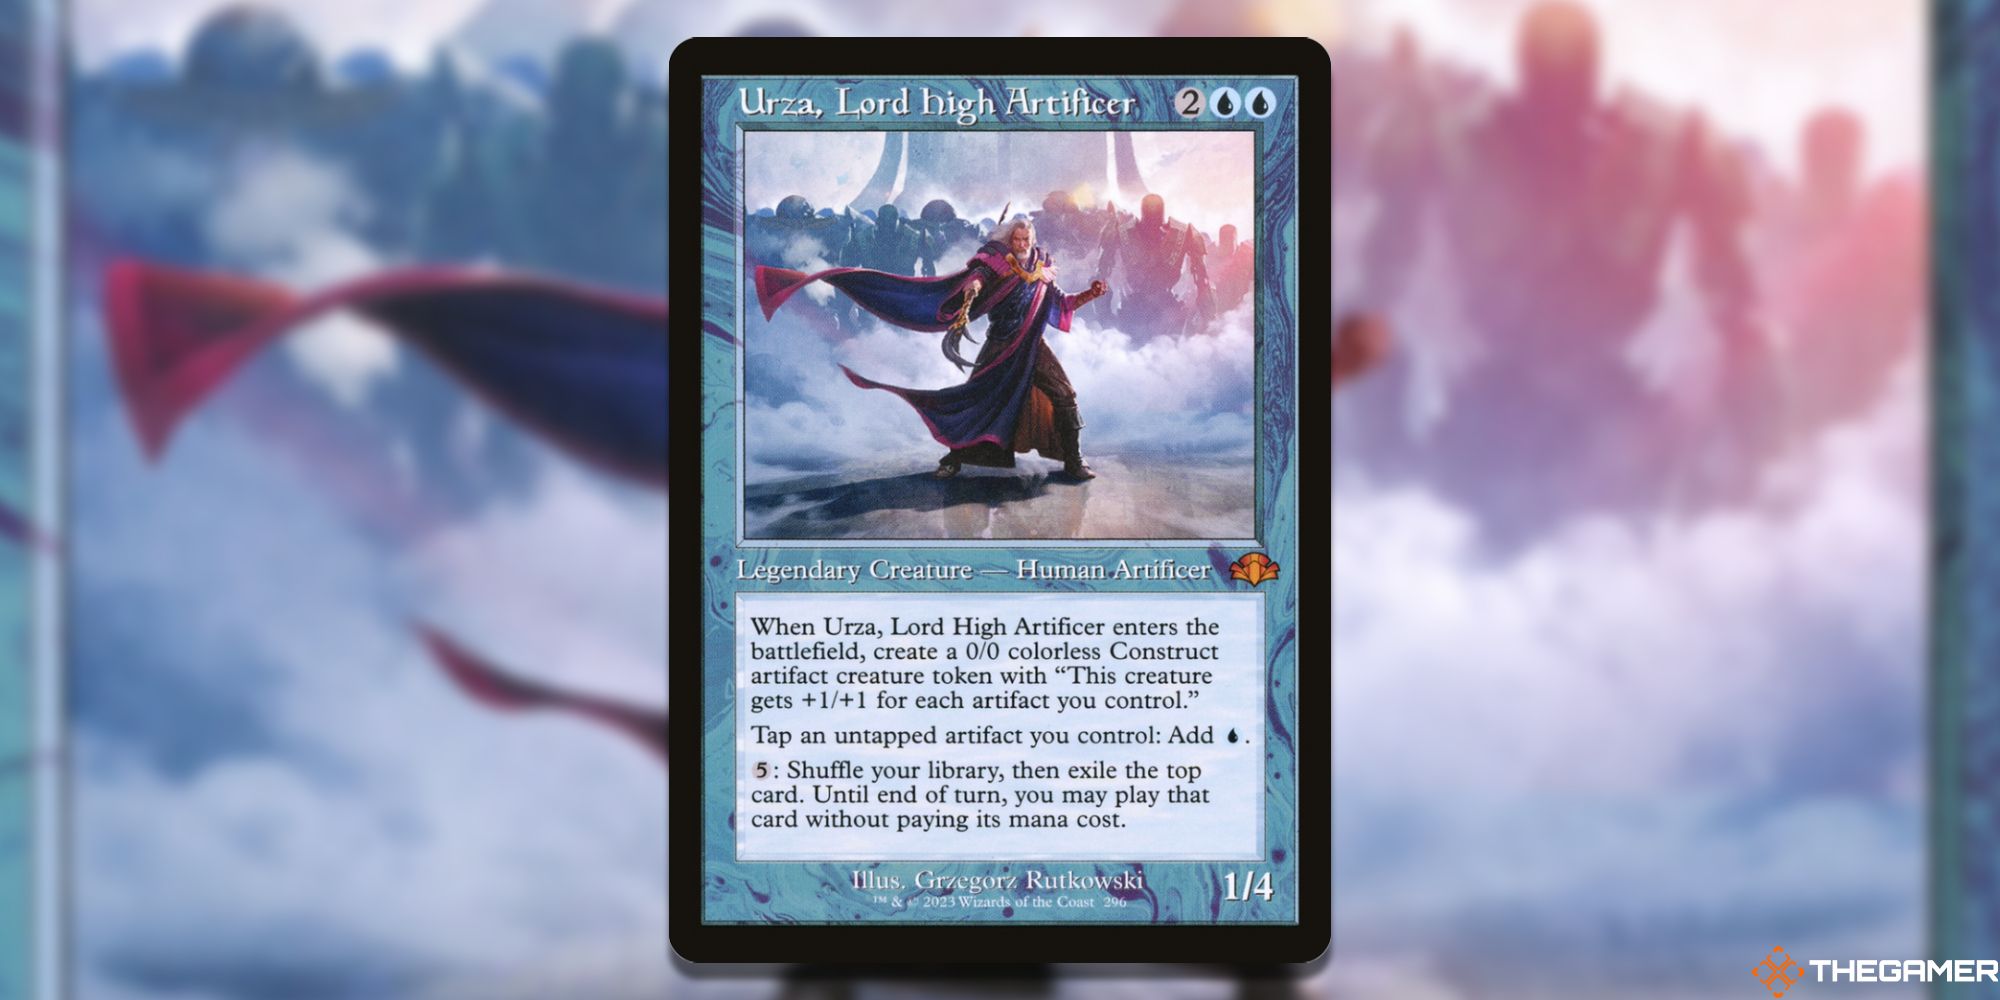 Image of the Urza Lord High Artificer card in Magic: The Gathering, with art by Grzegorz Rutkowski